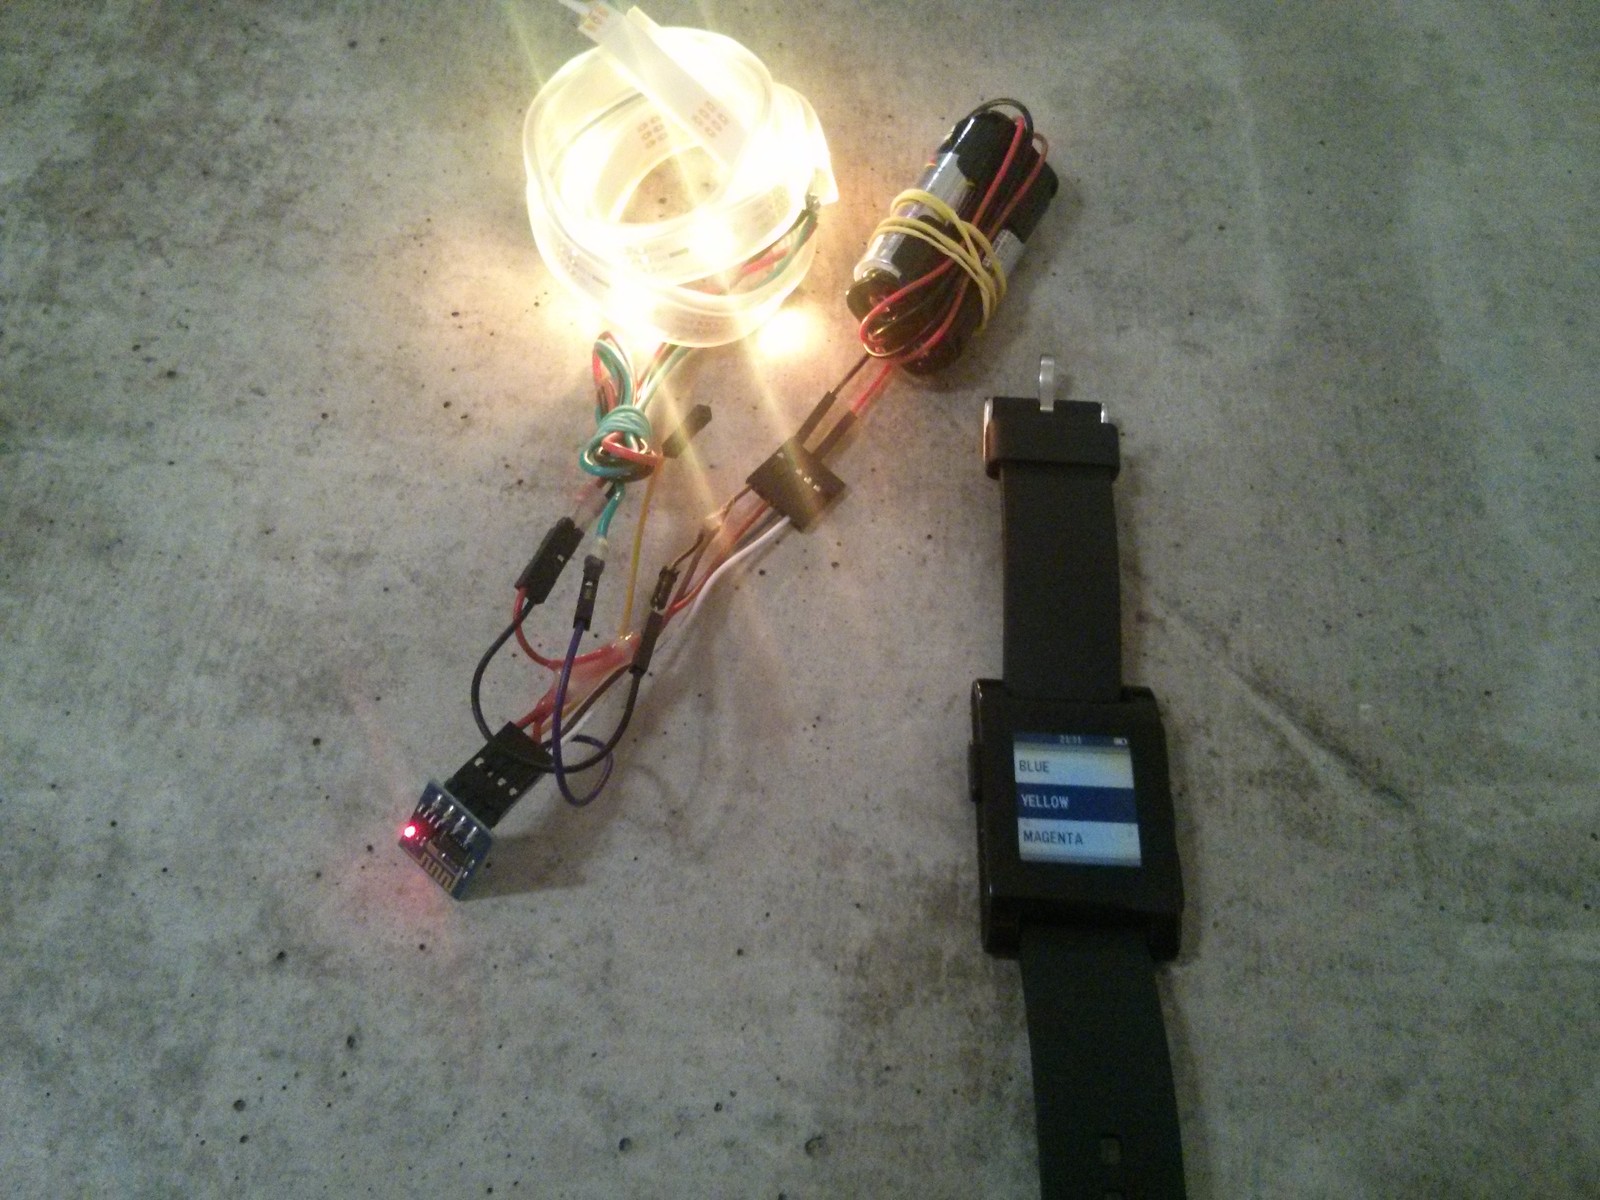 Controlling networked LEDs using a smartwatch